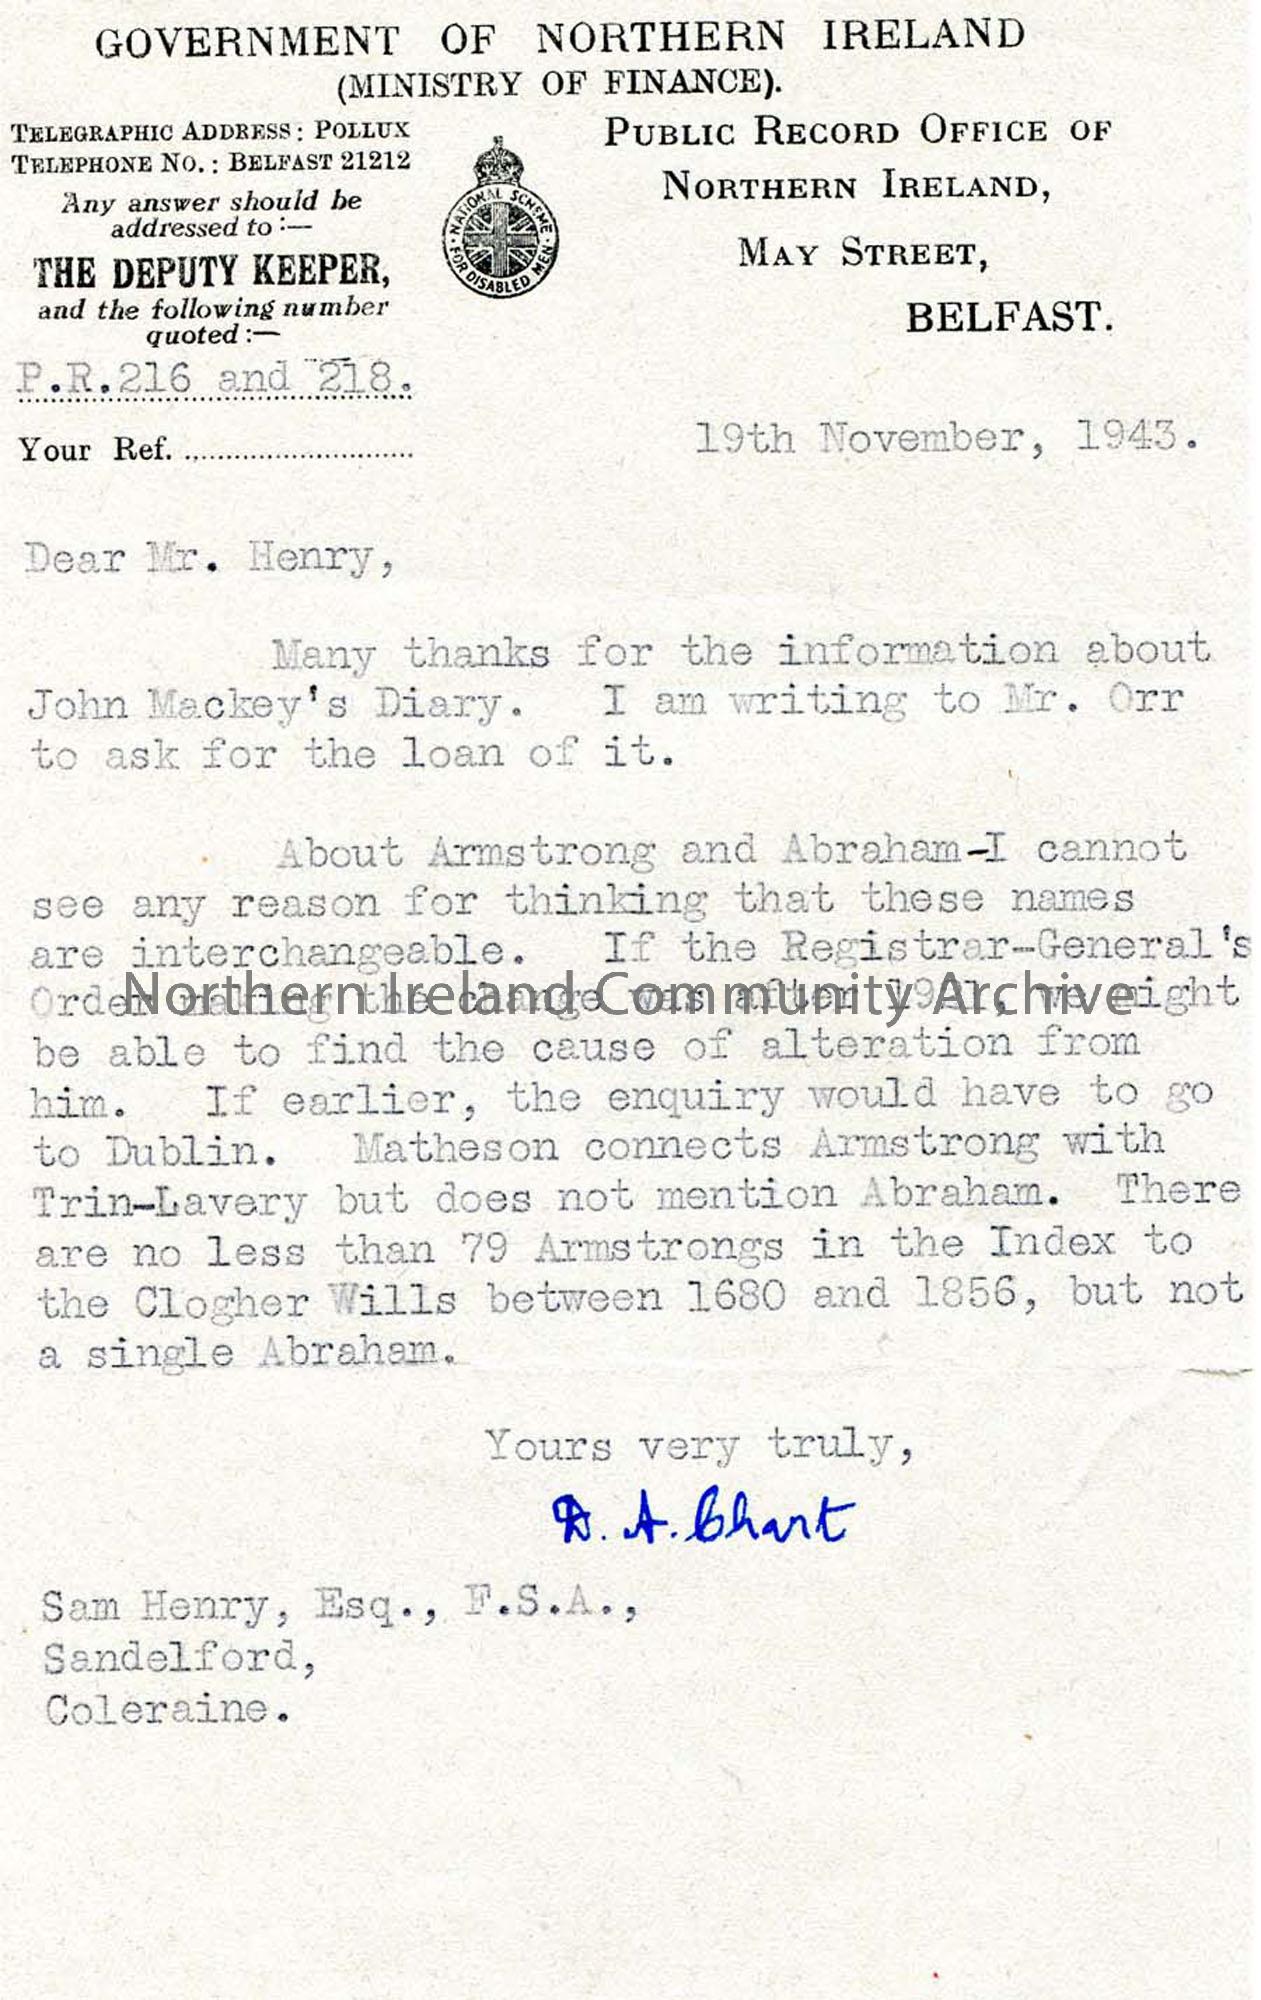 Letter from D. A. Chart 19.11.1943